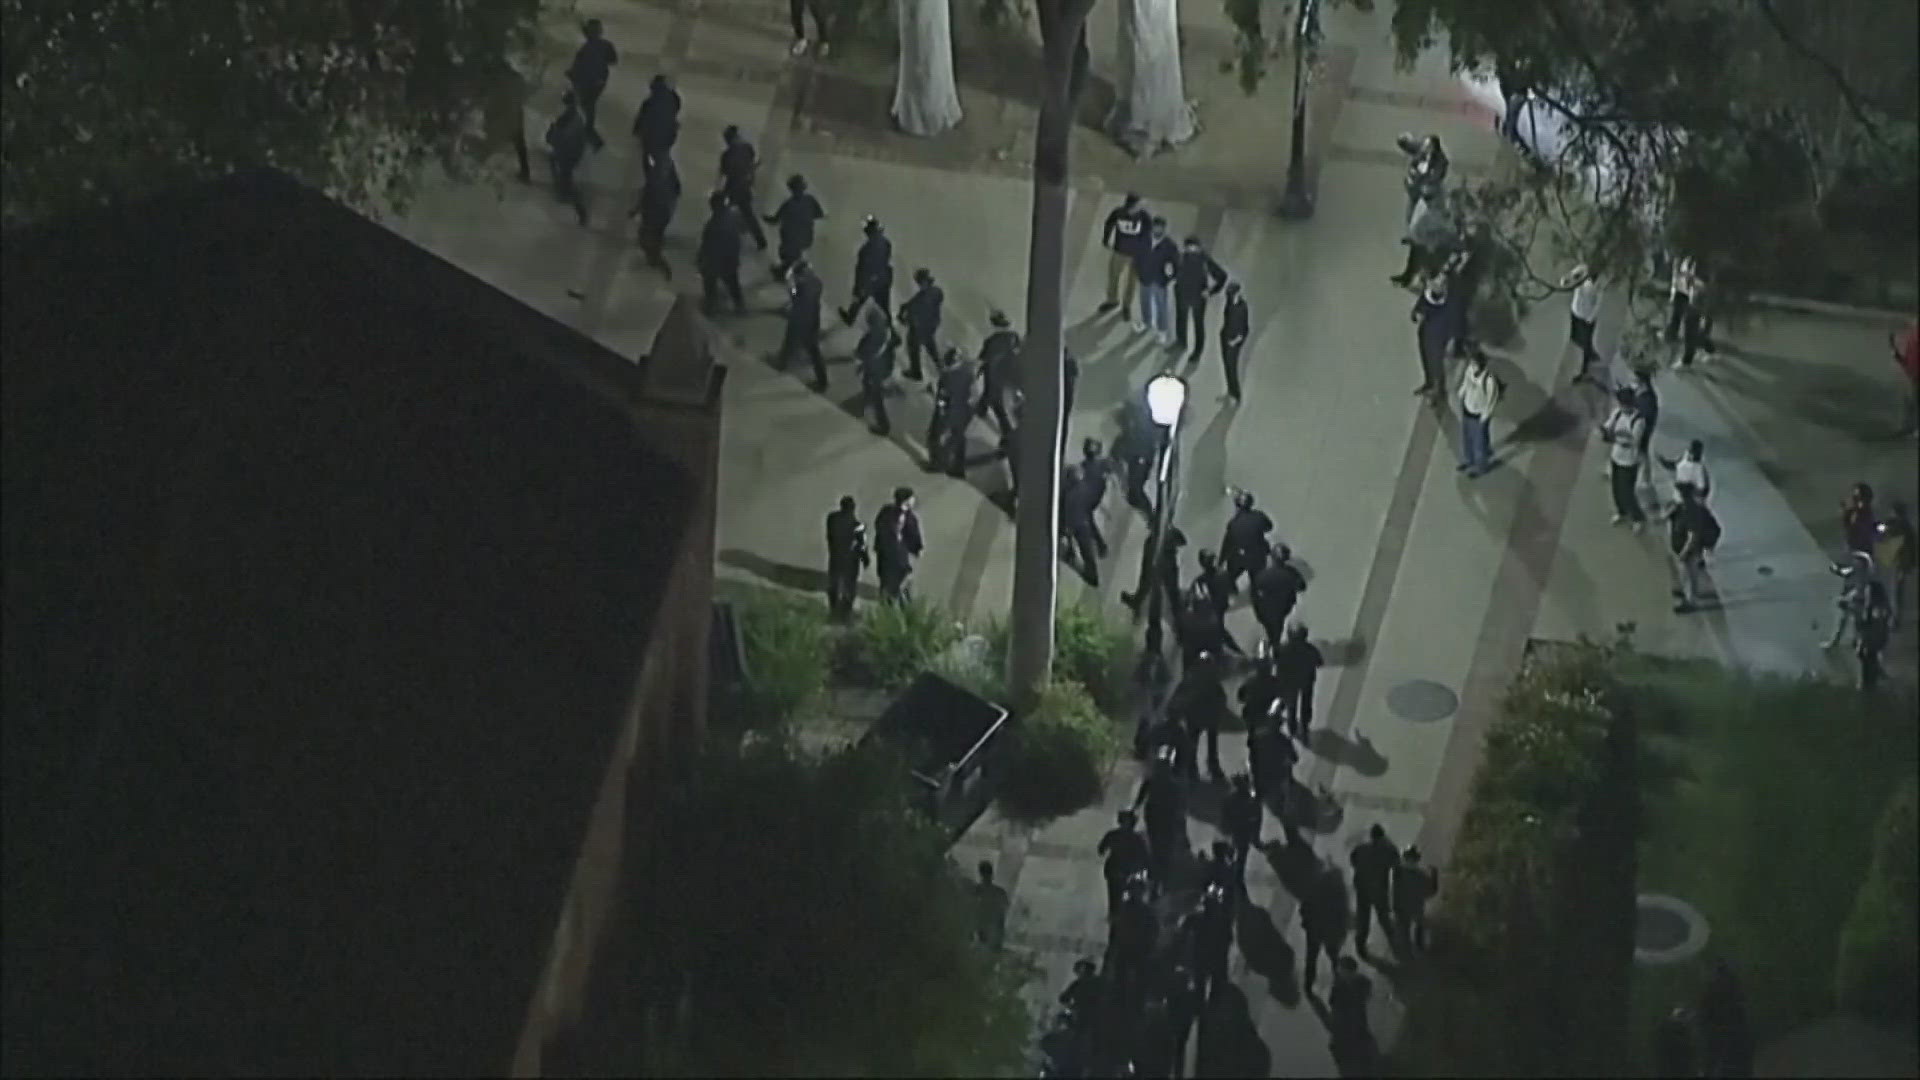 Police moved on the UCLA encampment early Thursday, tearing down barriers and using flash-bangs as they advanced.